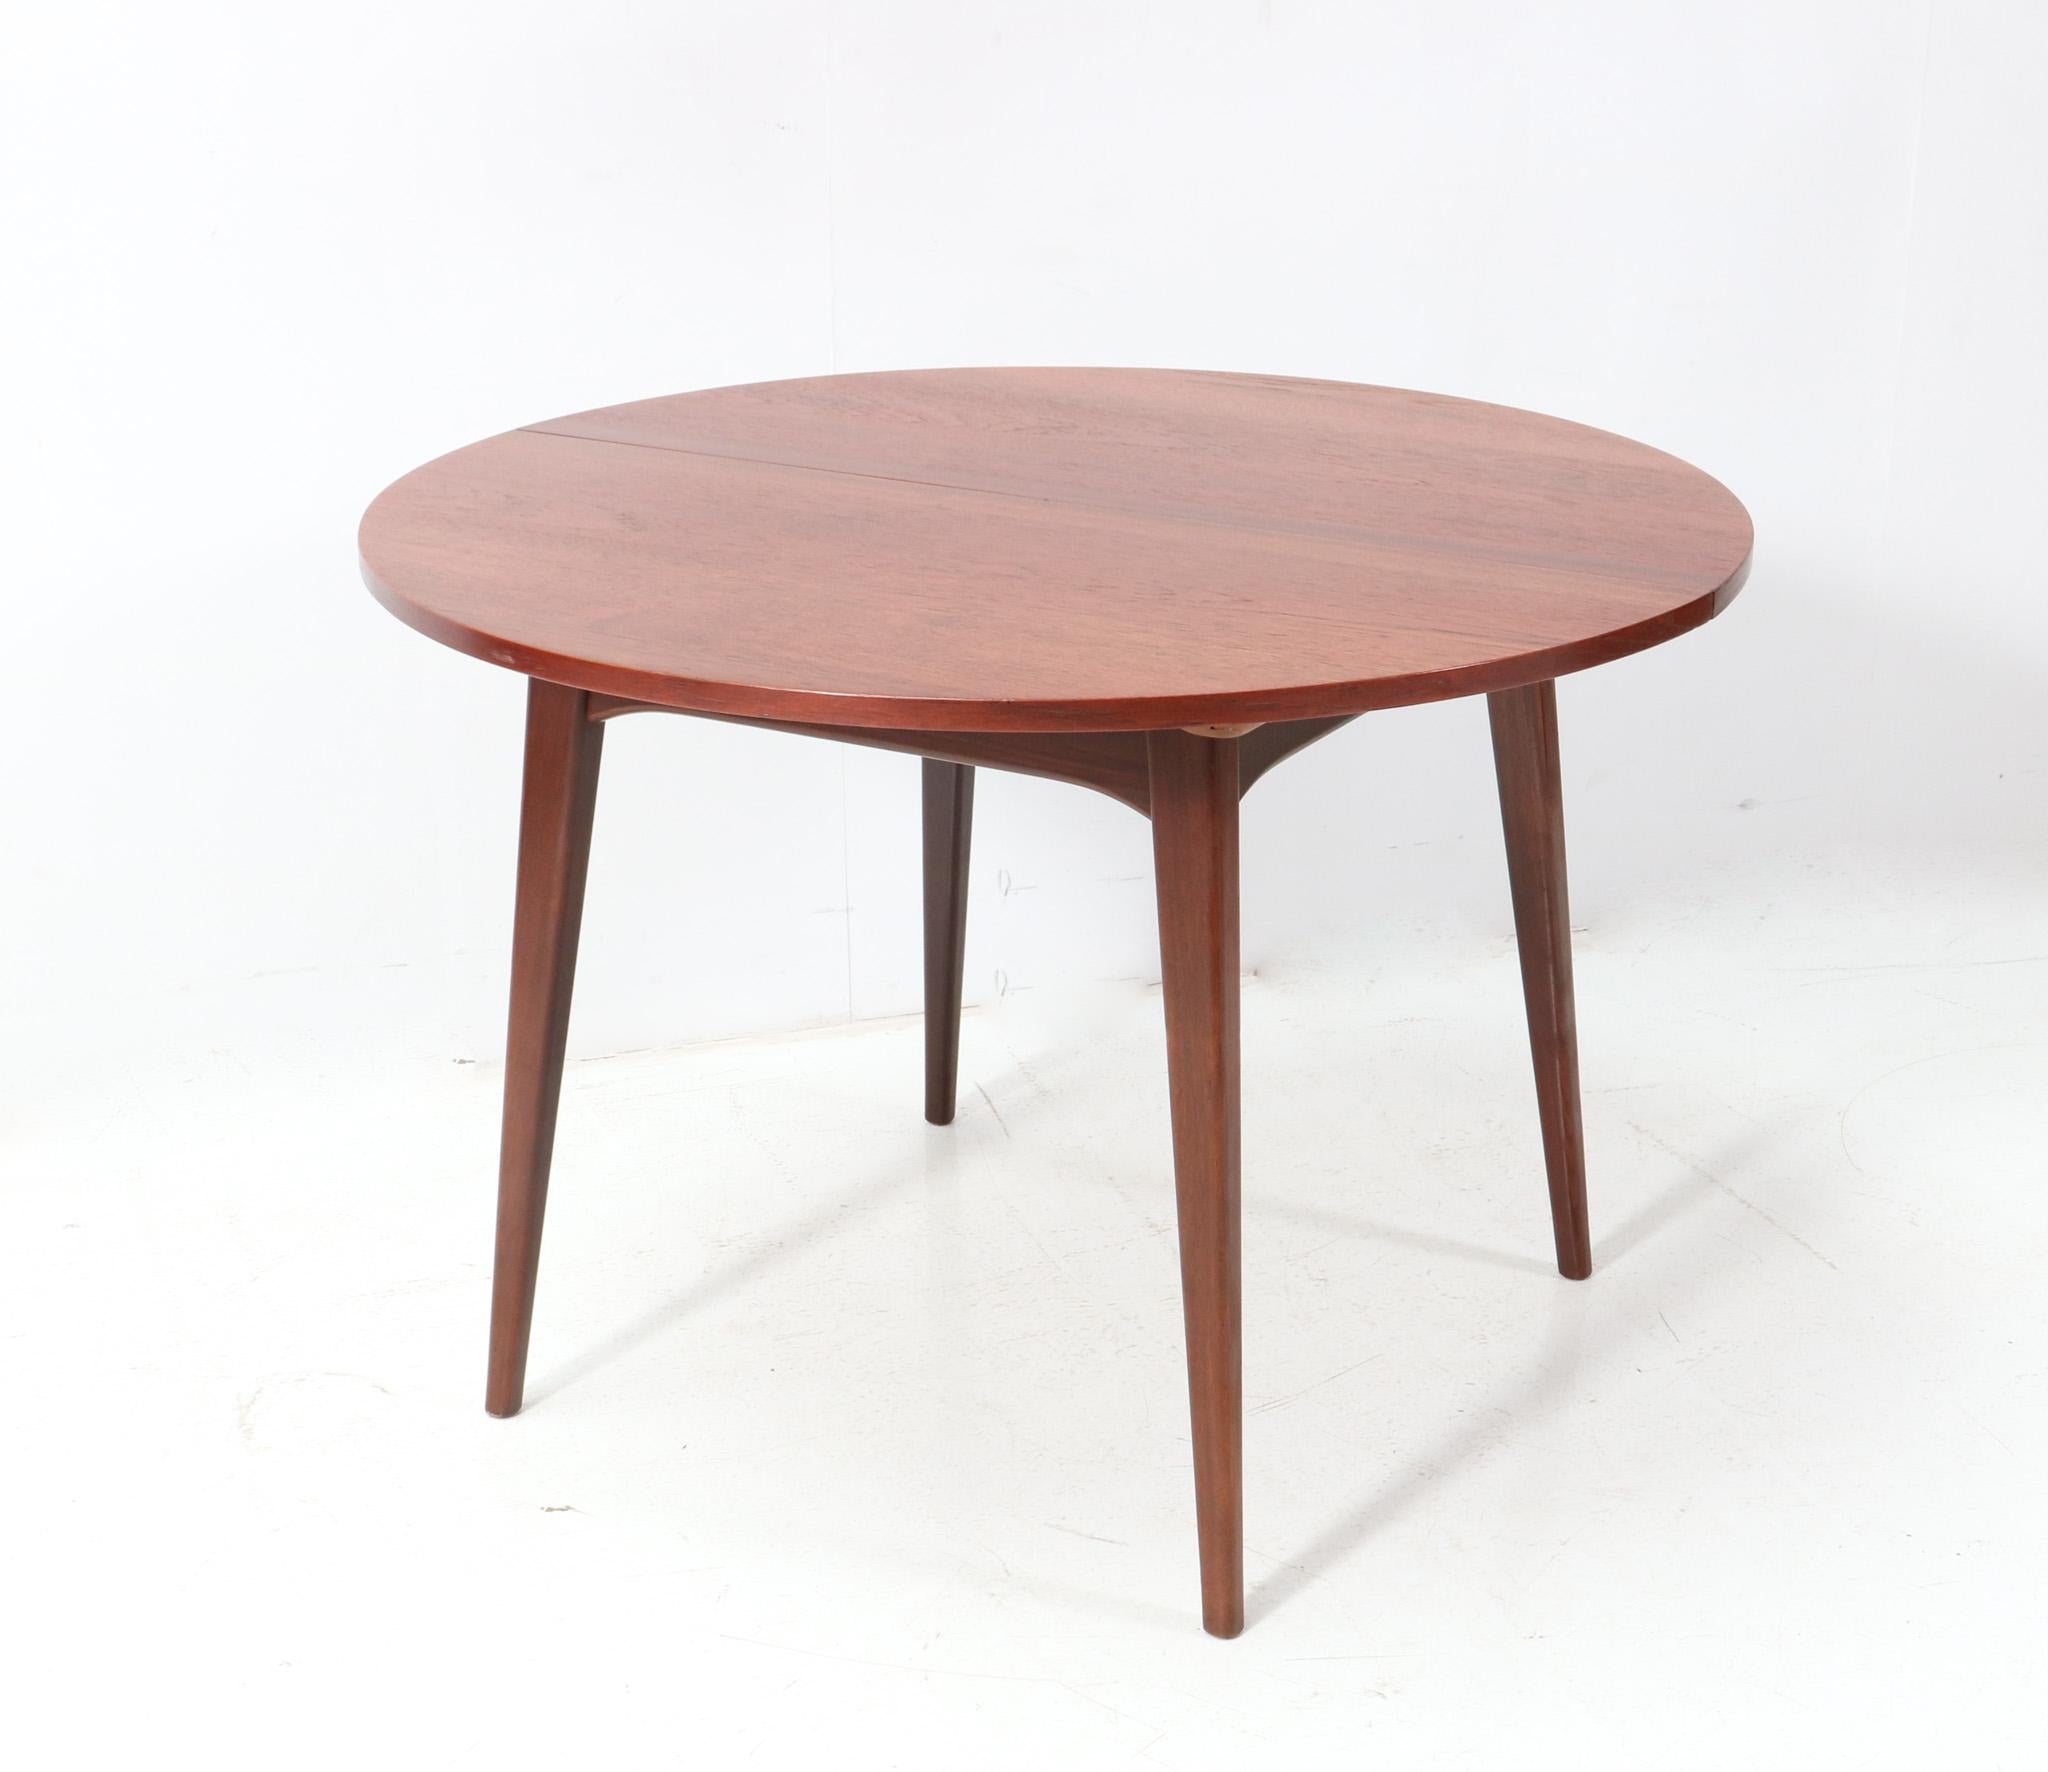 Teak Mid-Century Modern Extendable Dining Table by Louis van Teeffelen, 1950s In Good Condition For Sale In Amsterdam, NL